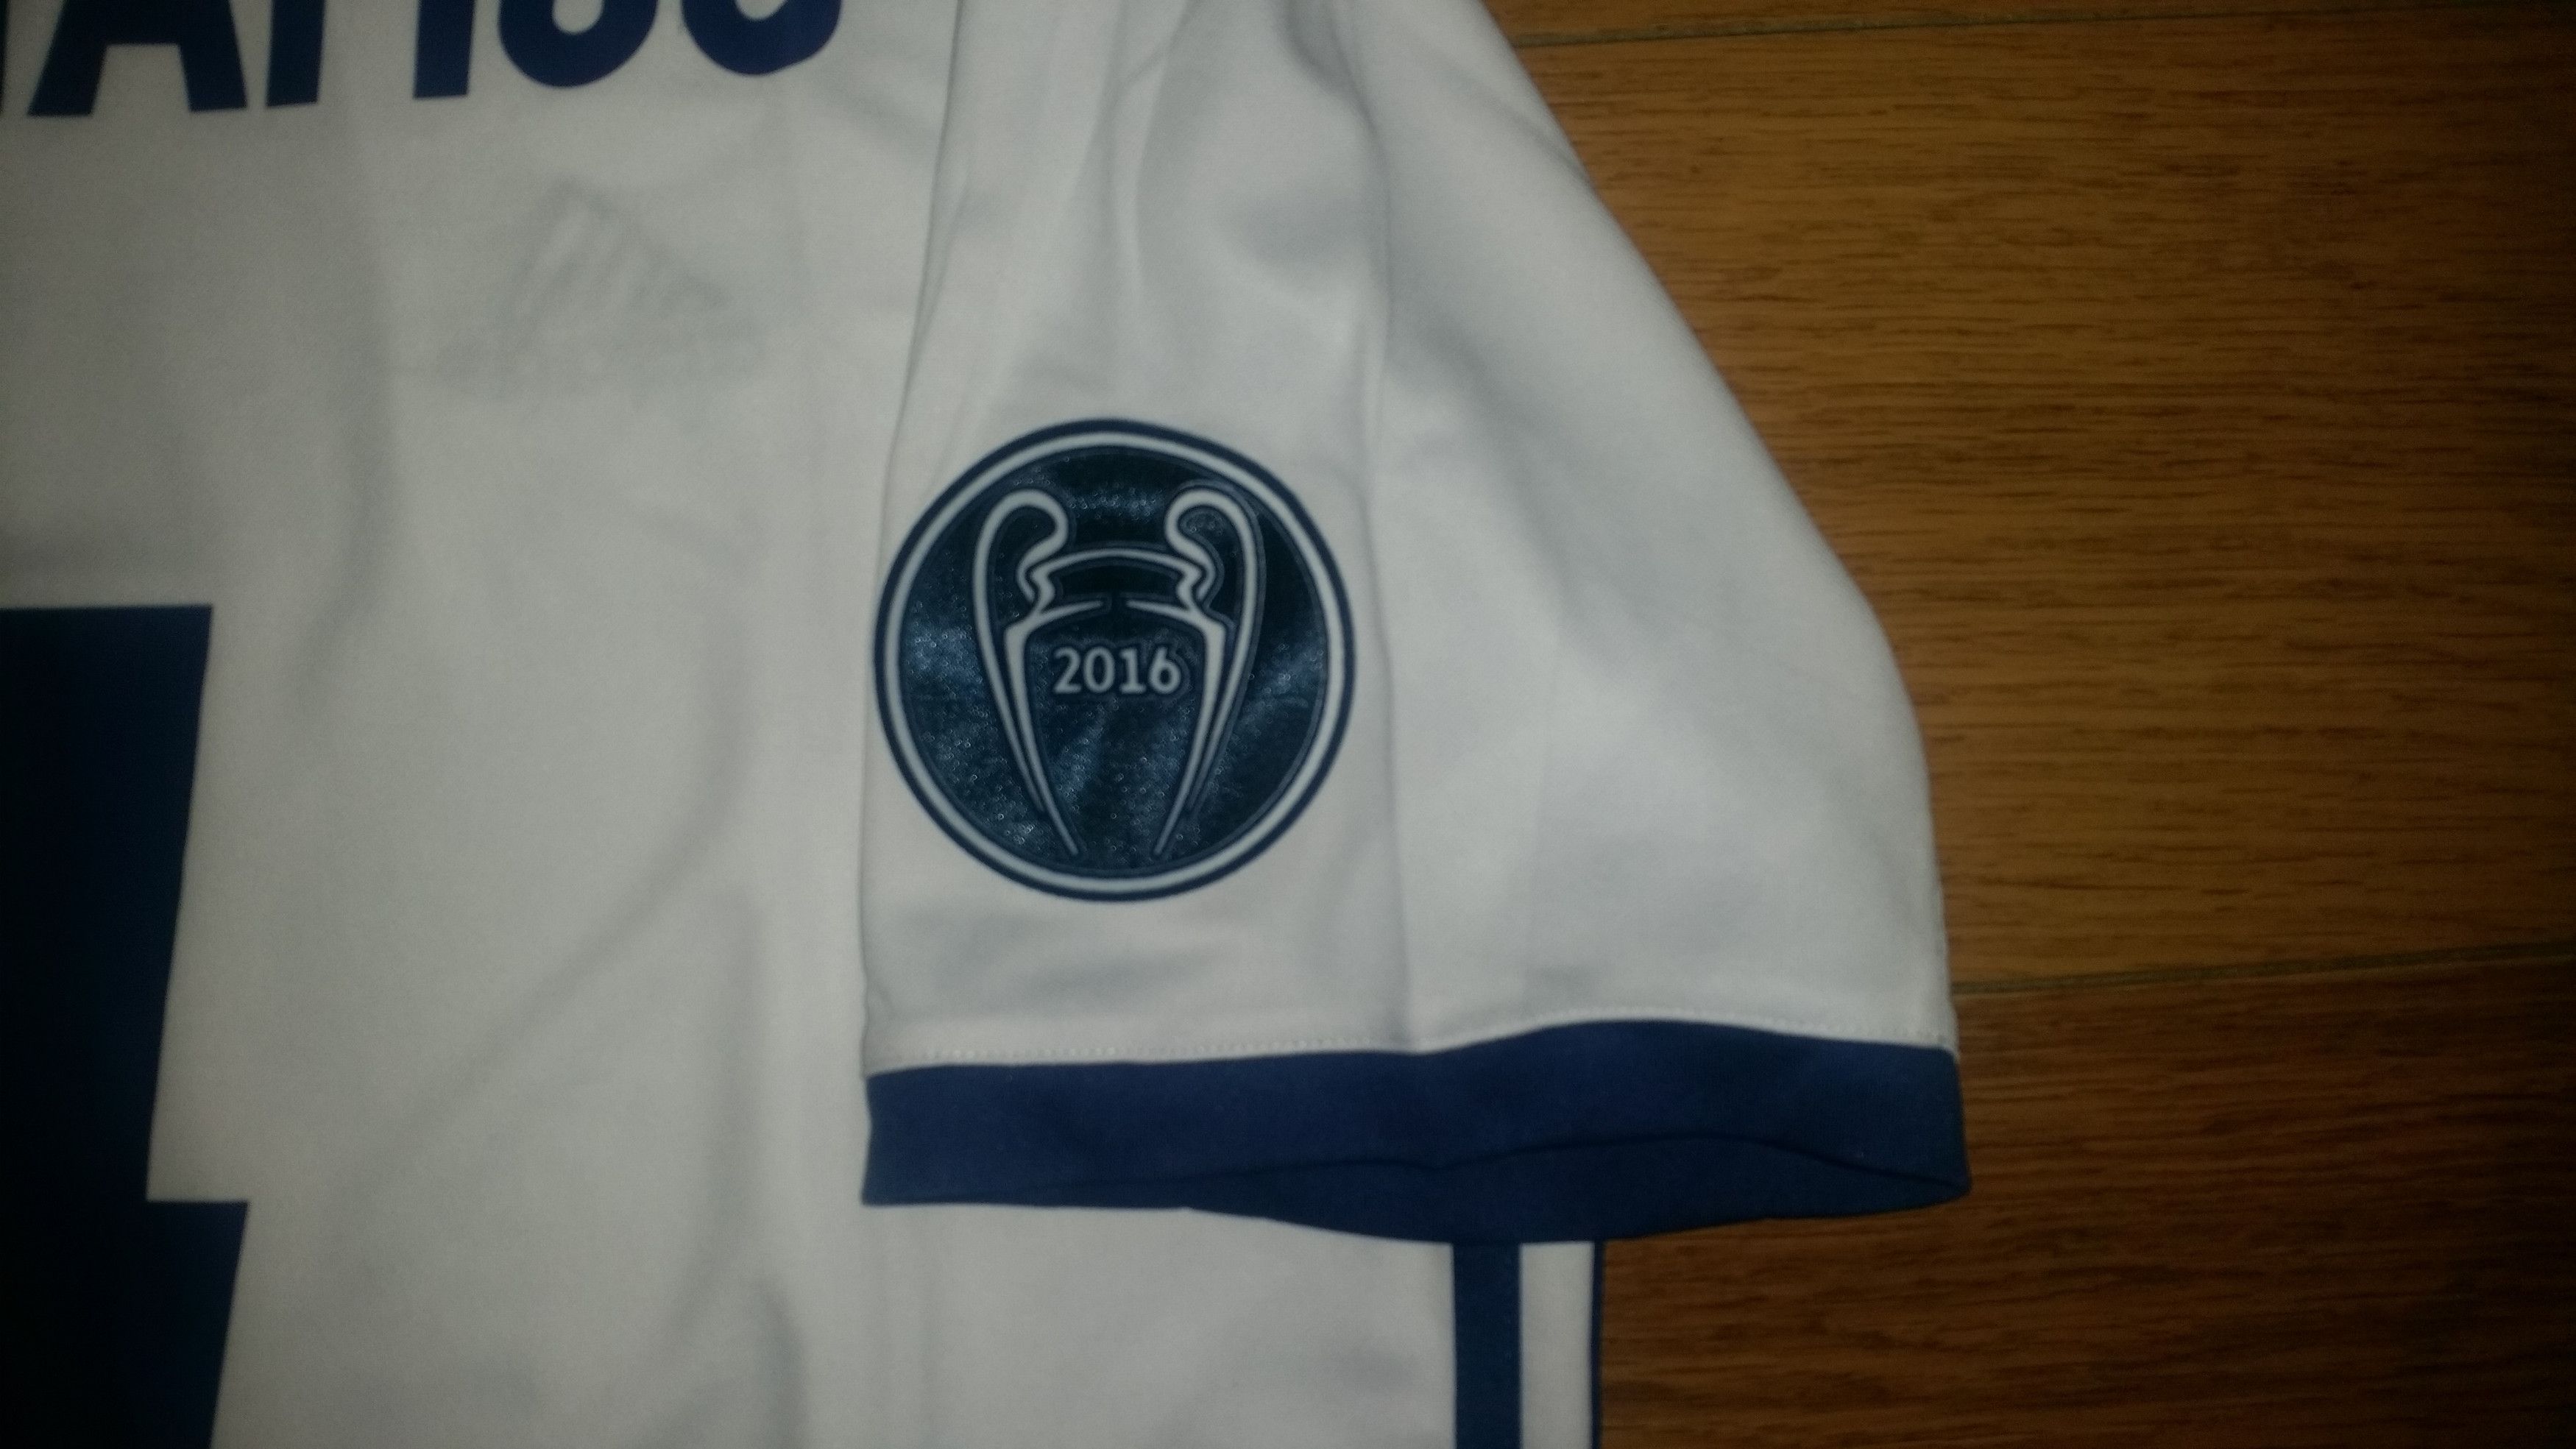 Soccer Jersey Sergio Ramos Soccer Jersey Real Madrid 2016 - 17 UCL patchs Size US L / EU 52-54 / 3 - 8 Thumbnail